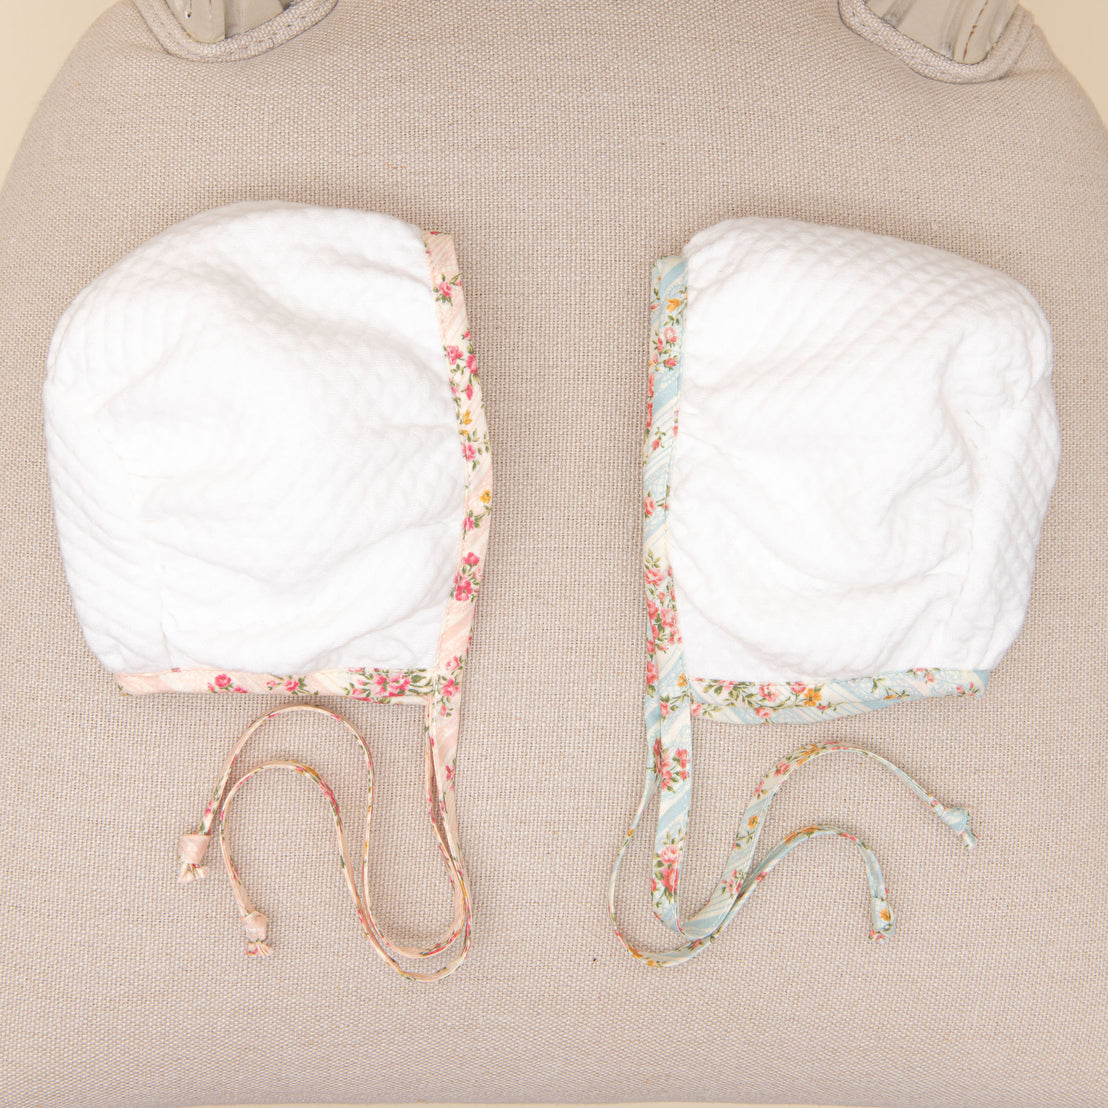 Flat lay comparison of the Eloise Quilted Bonnet in the colors "Blush" and "Powder Blue".